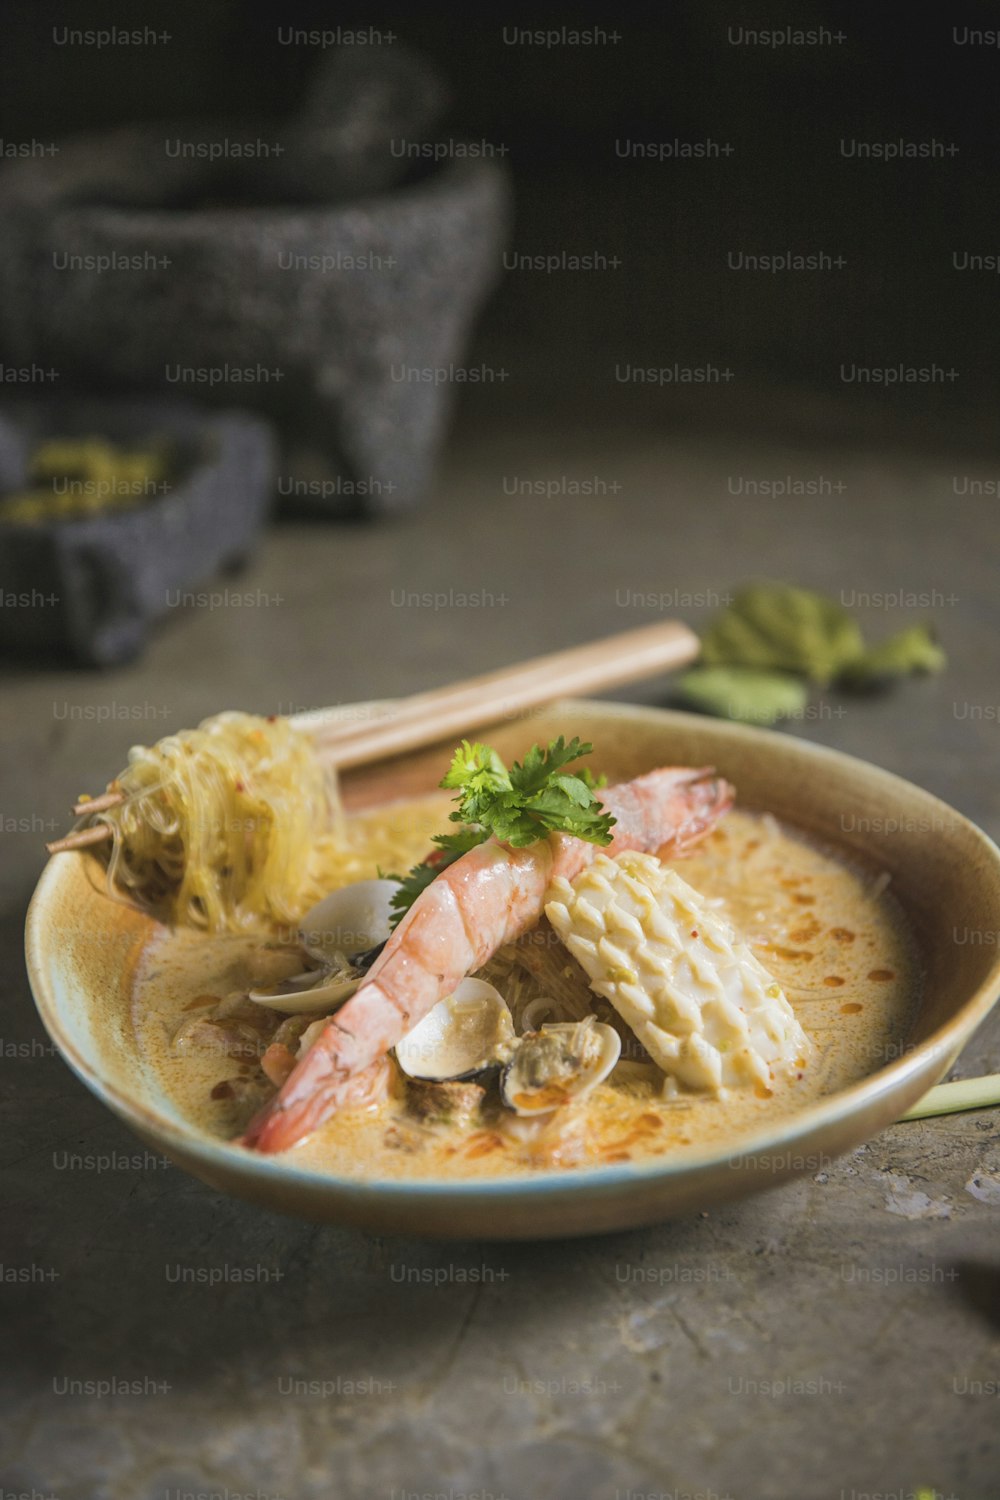 a bowl of soup with shrimp, mushrooms, and noodles